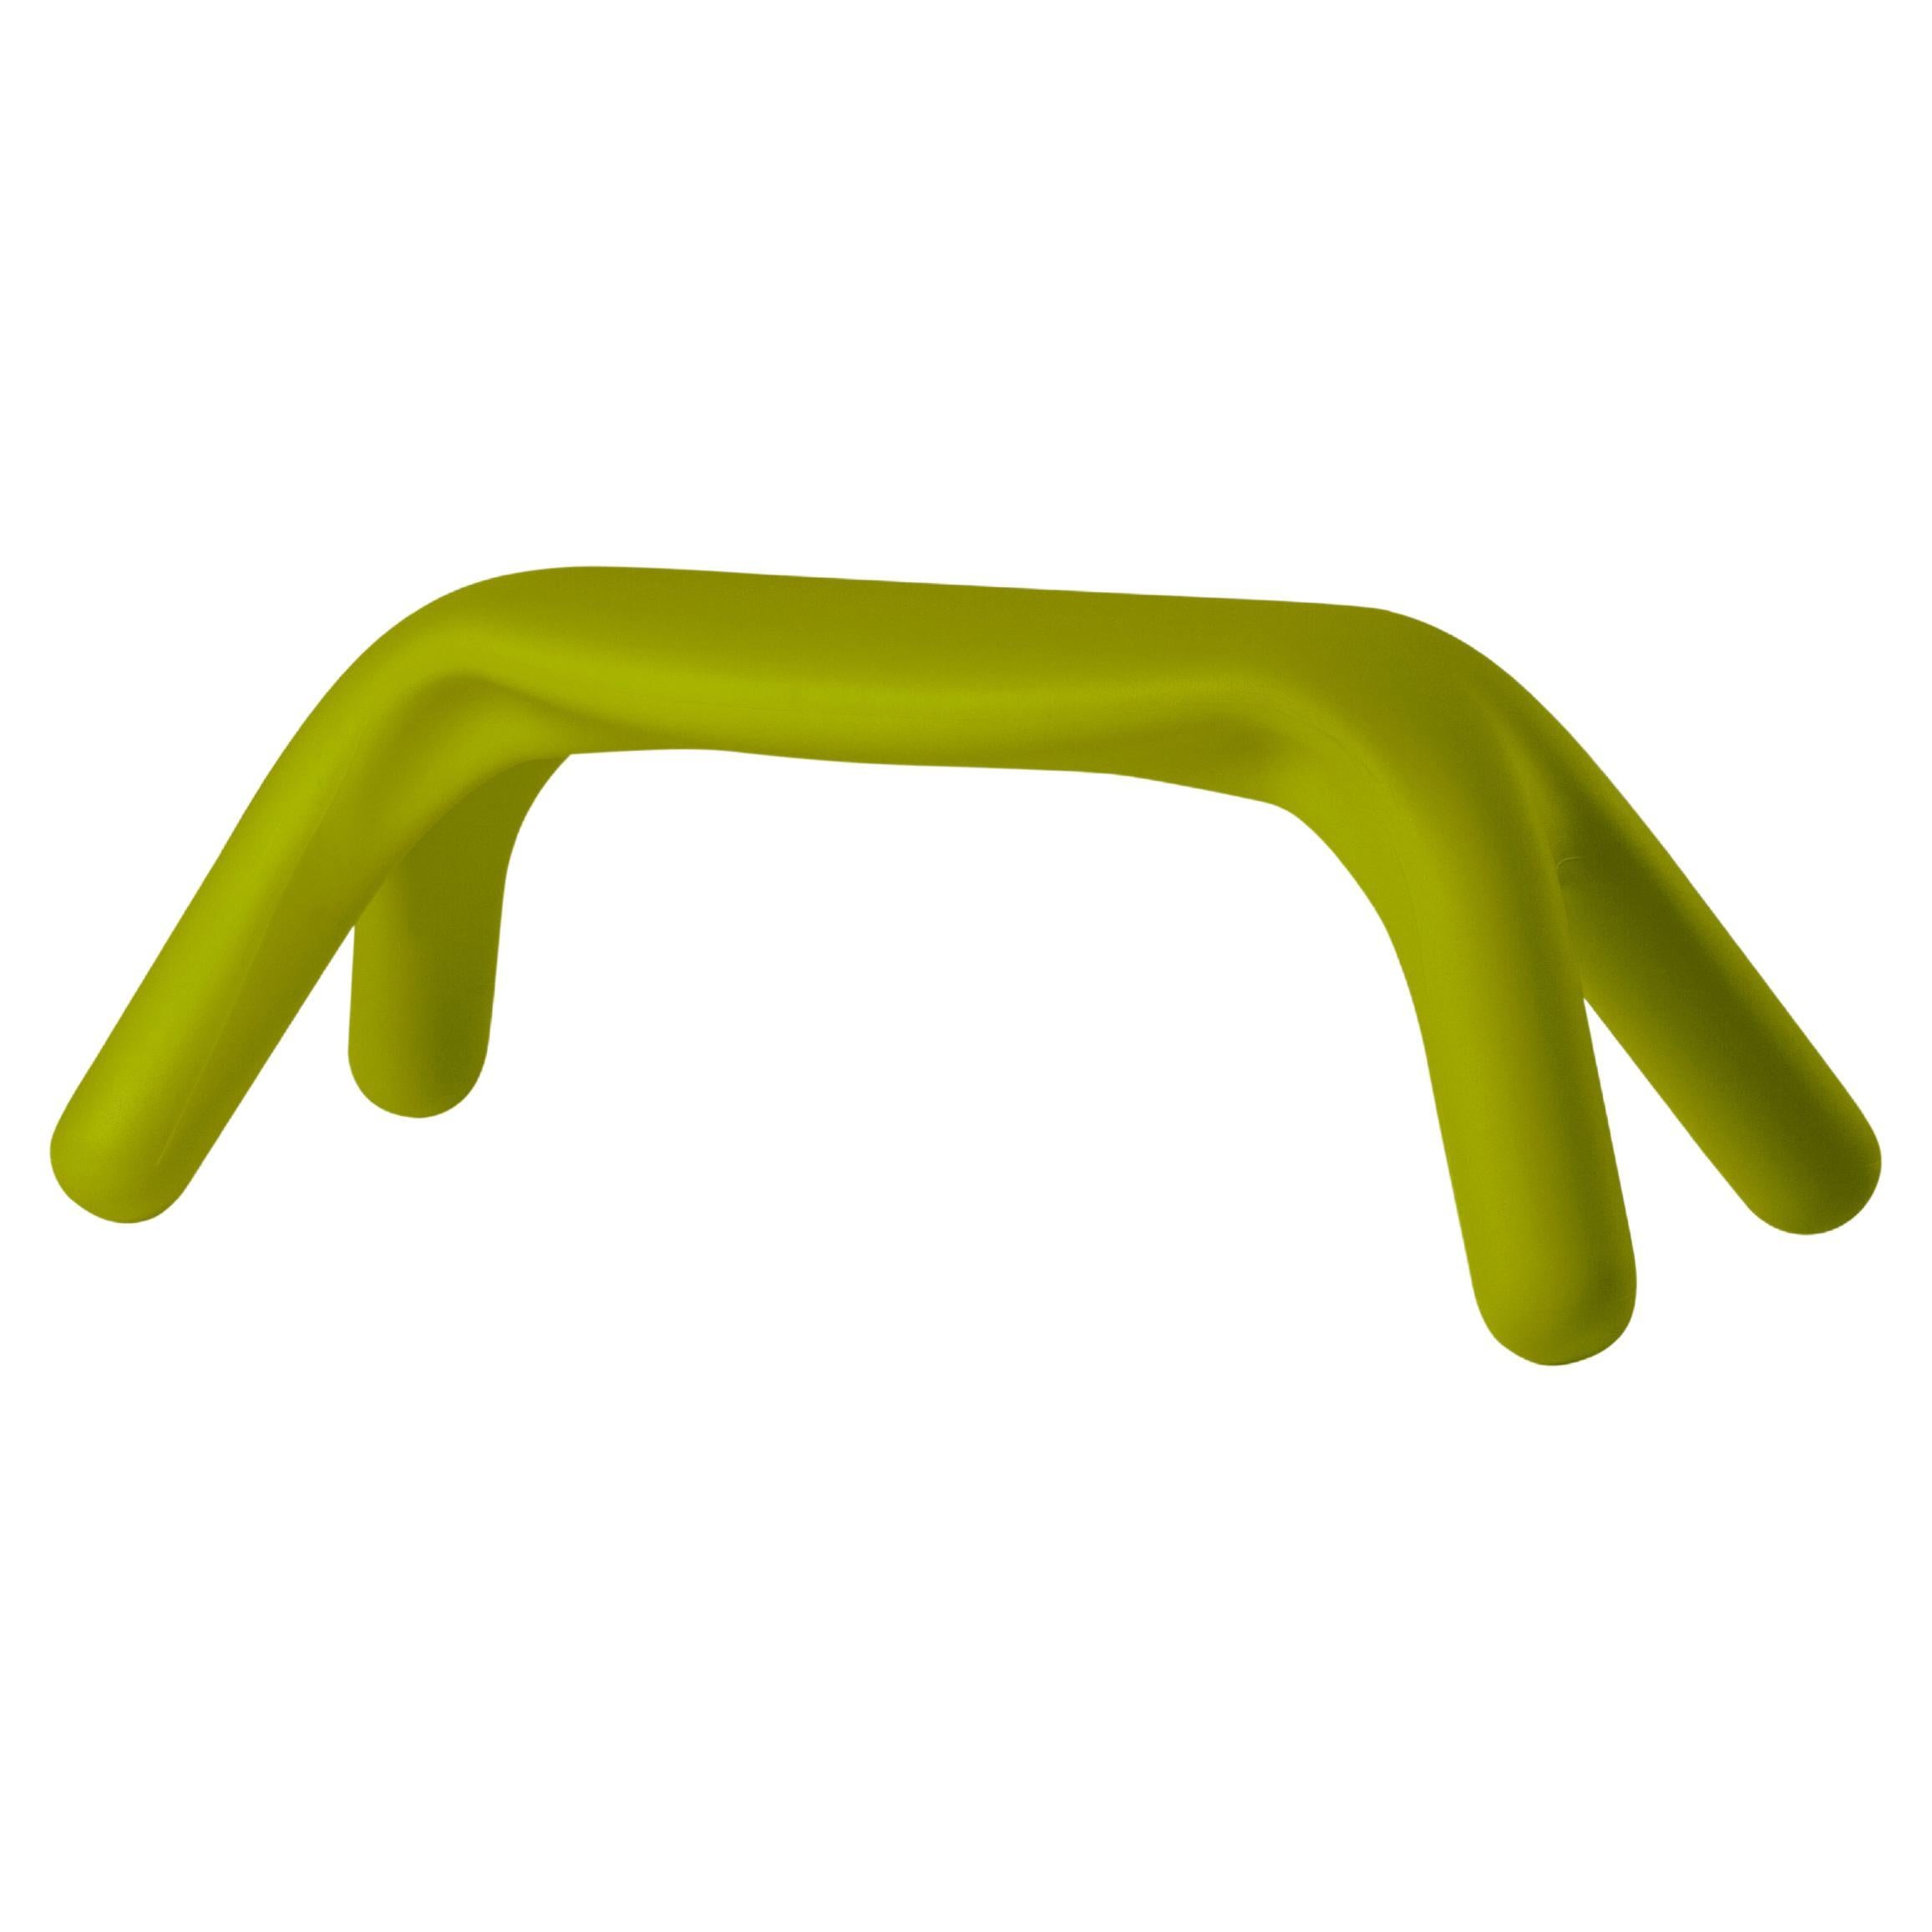 Slide Design Atlas Bench in Lime Green by Giorgio Biscaro For Sale